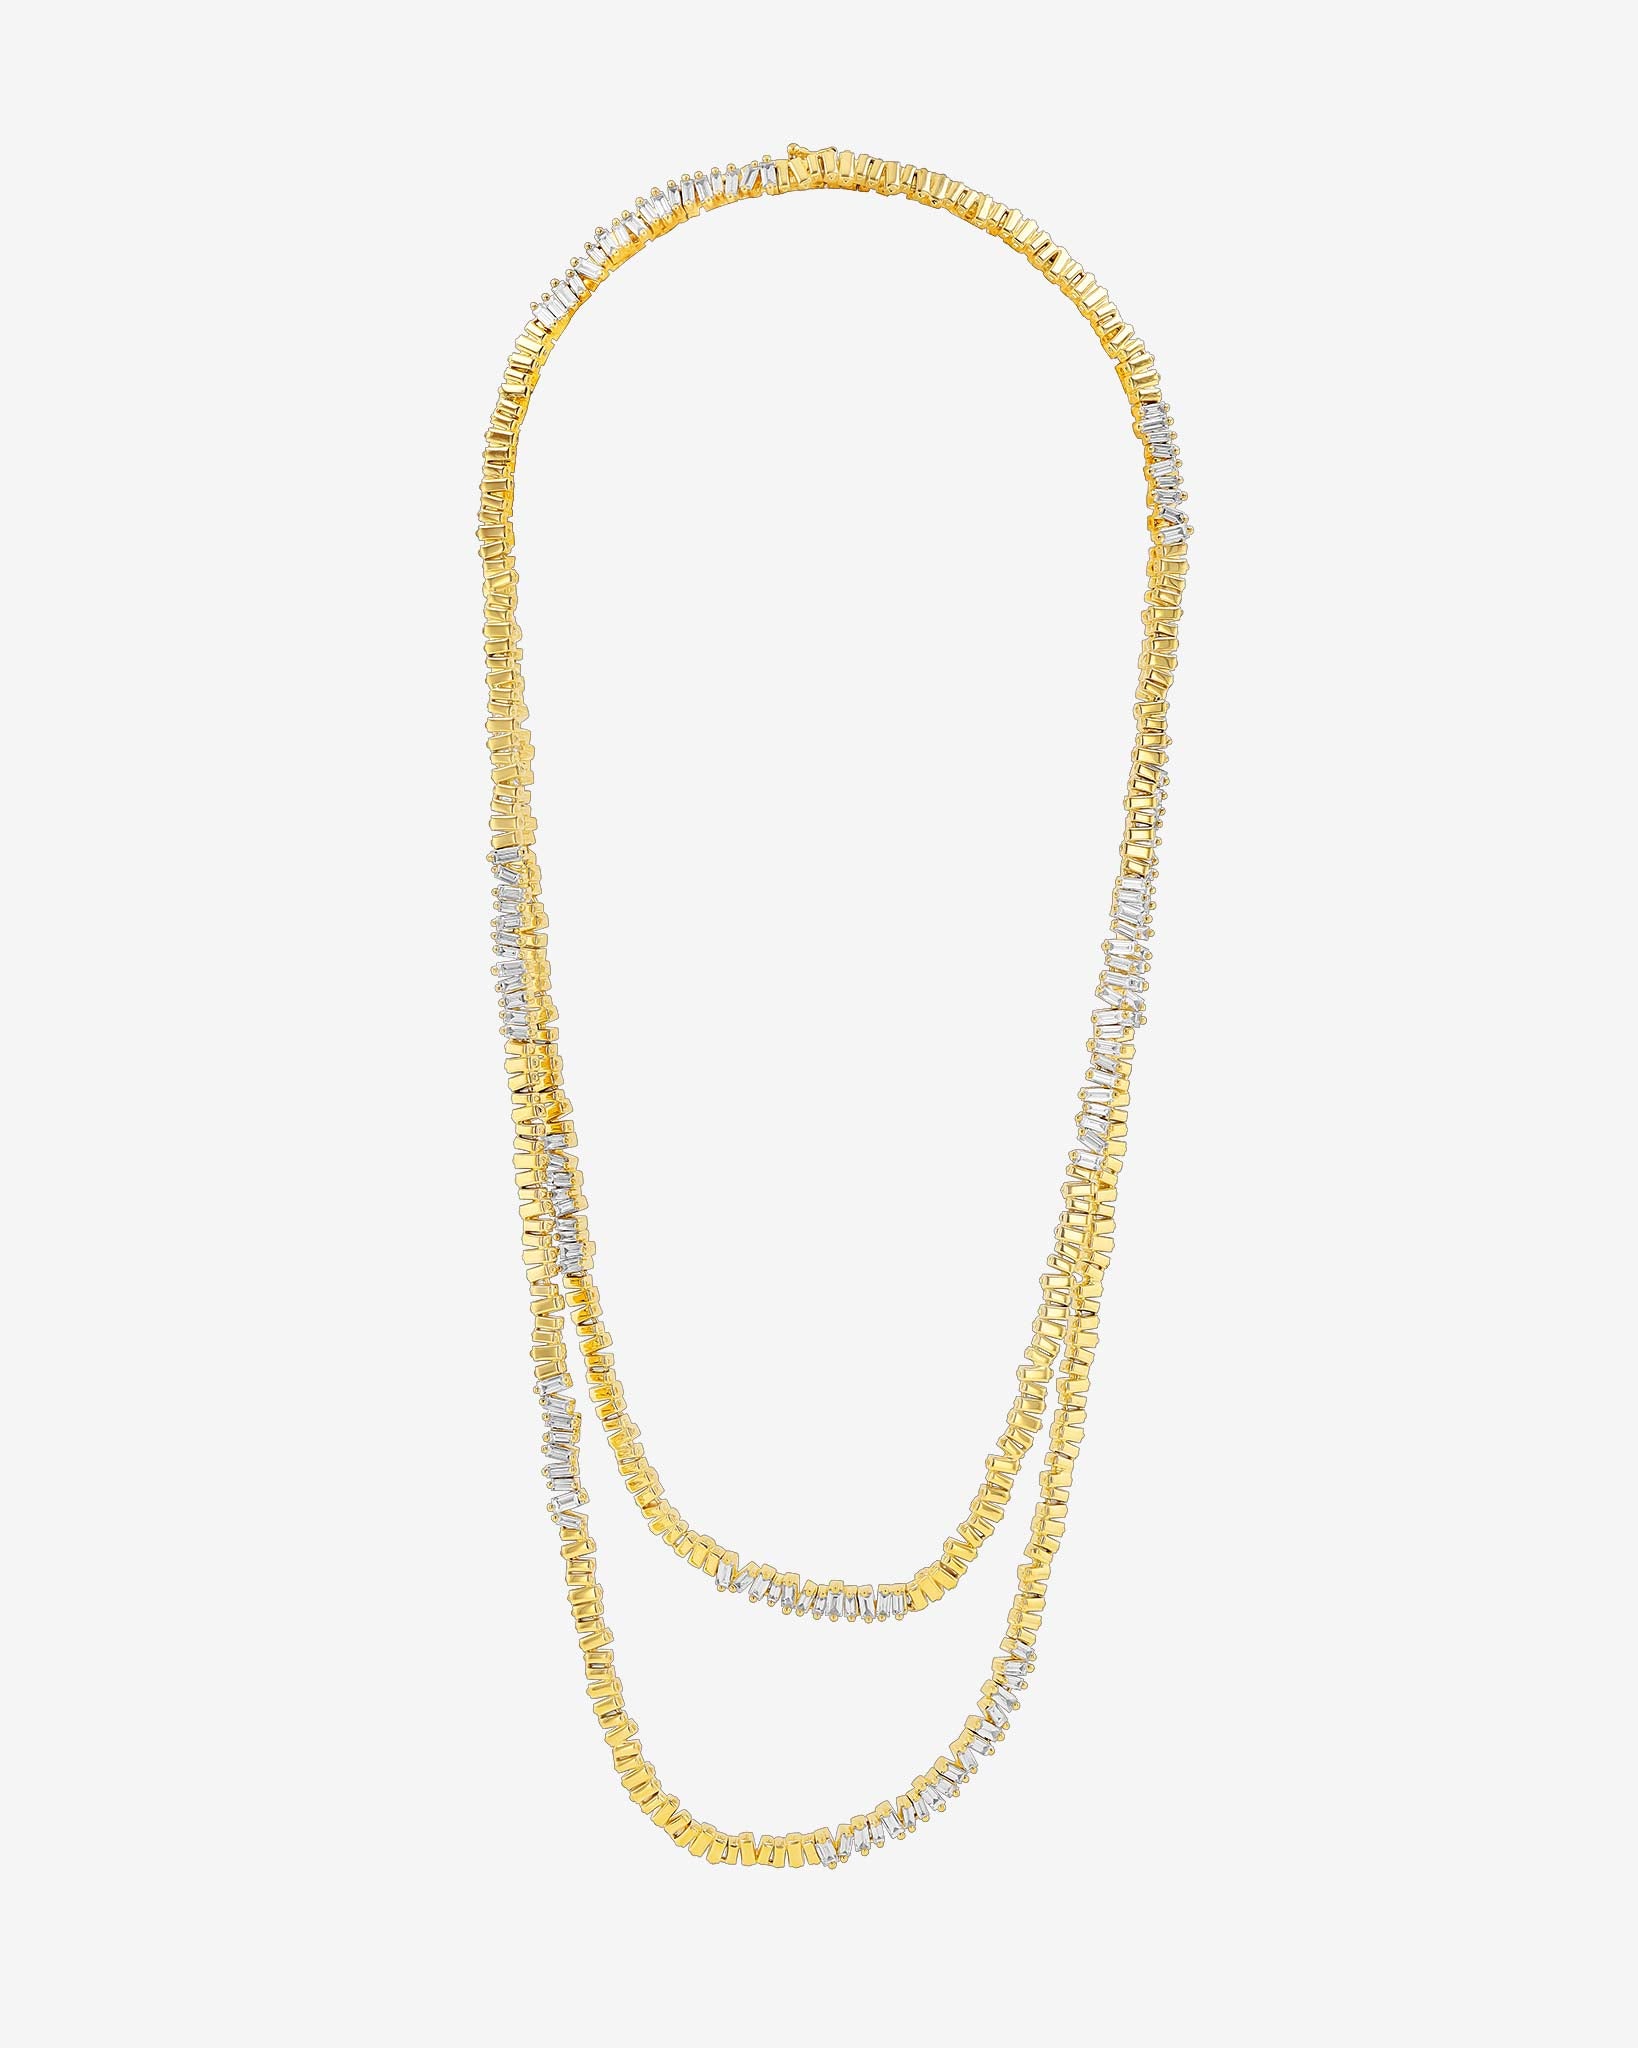 Suzanne Kalan Golden Diamond 36" Inch Baguette Tennis Necklace in 18k yellow gold